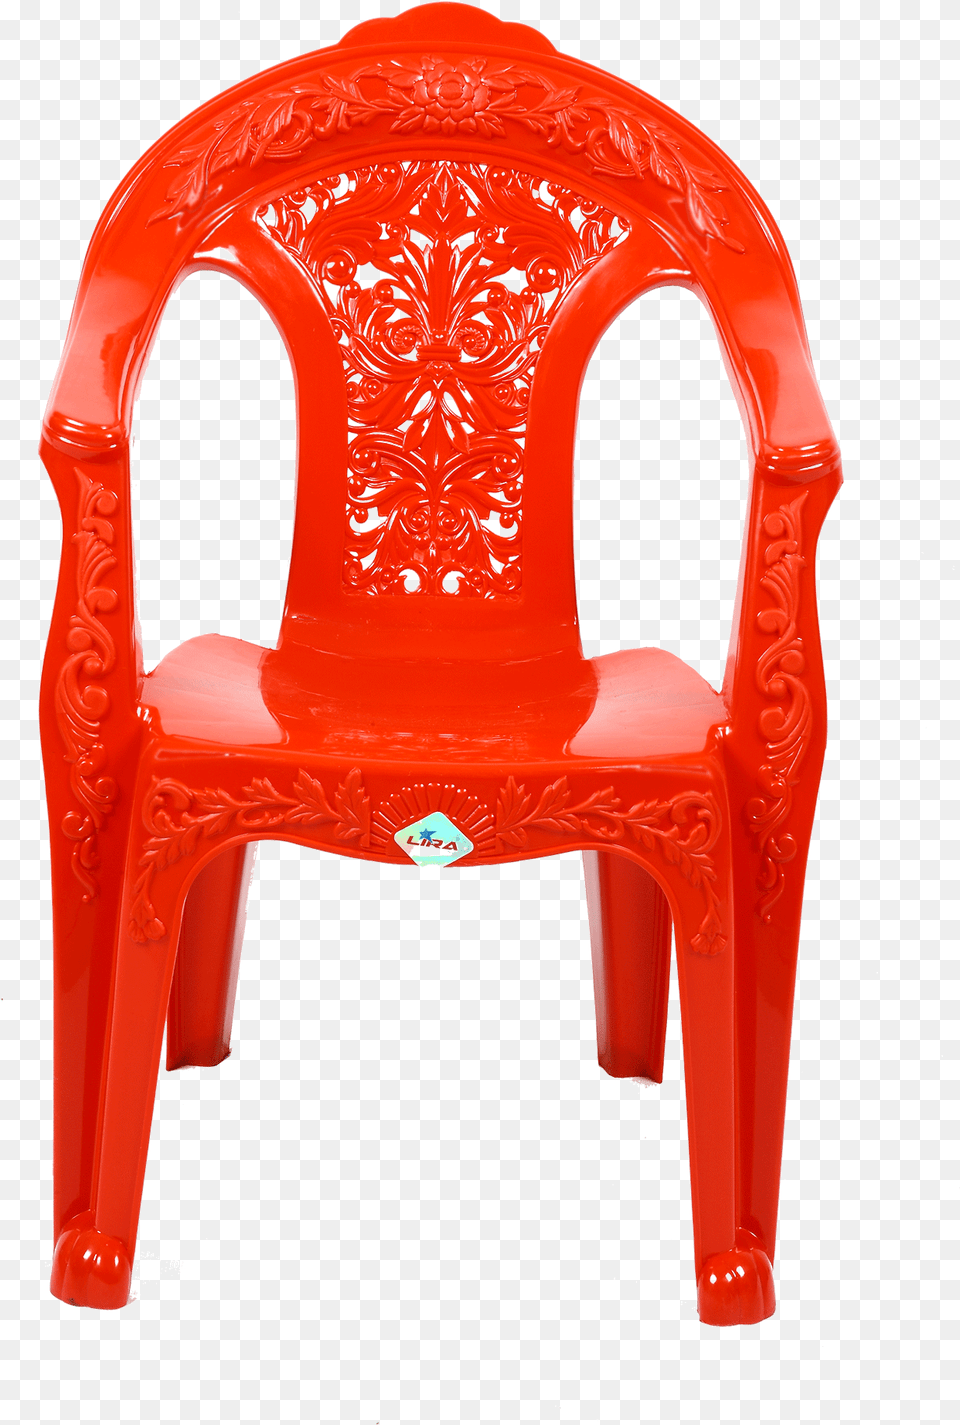 Baby Chair Lira Baby Chair Lira Plastic Baby Chair, Furniture, Armchair Free Png